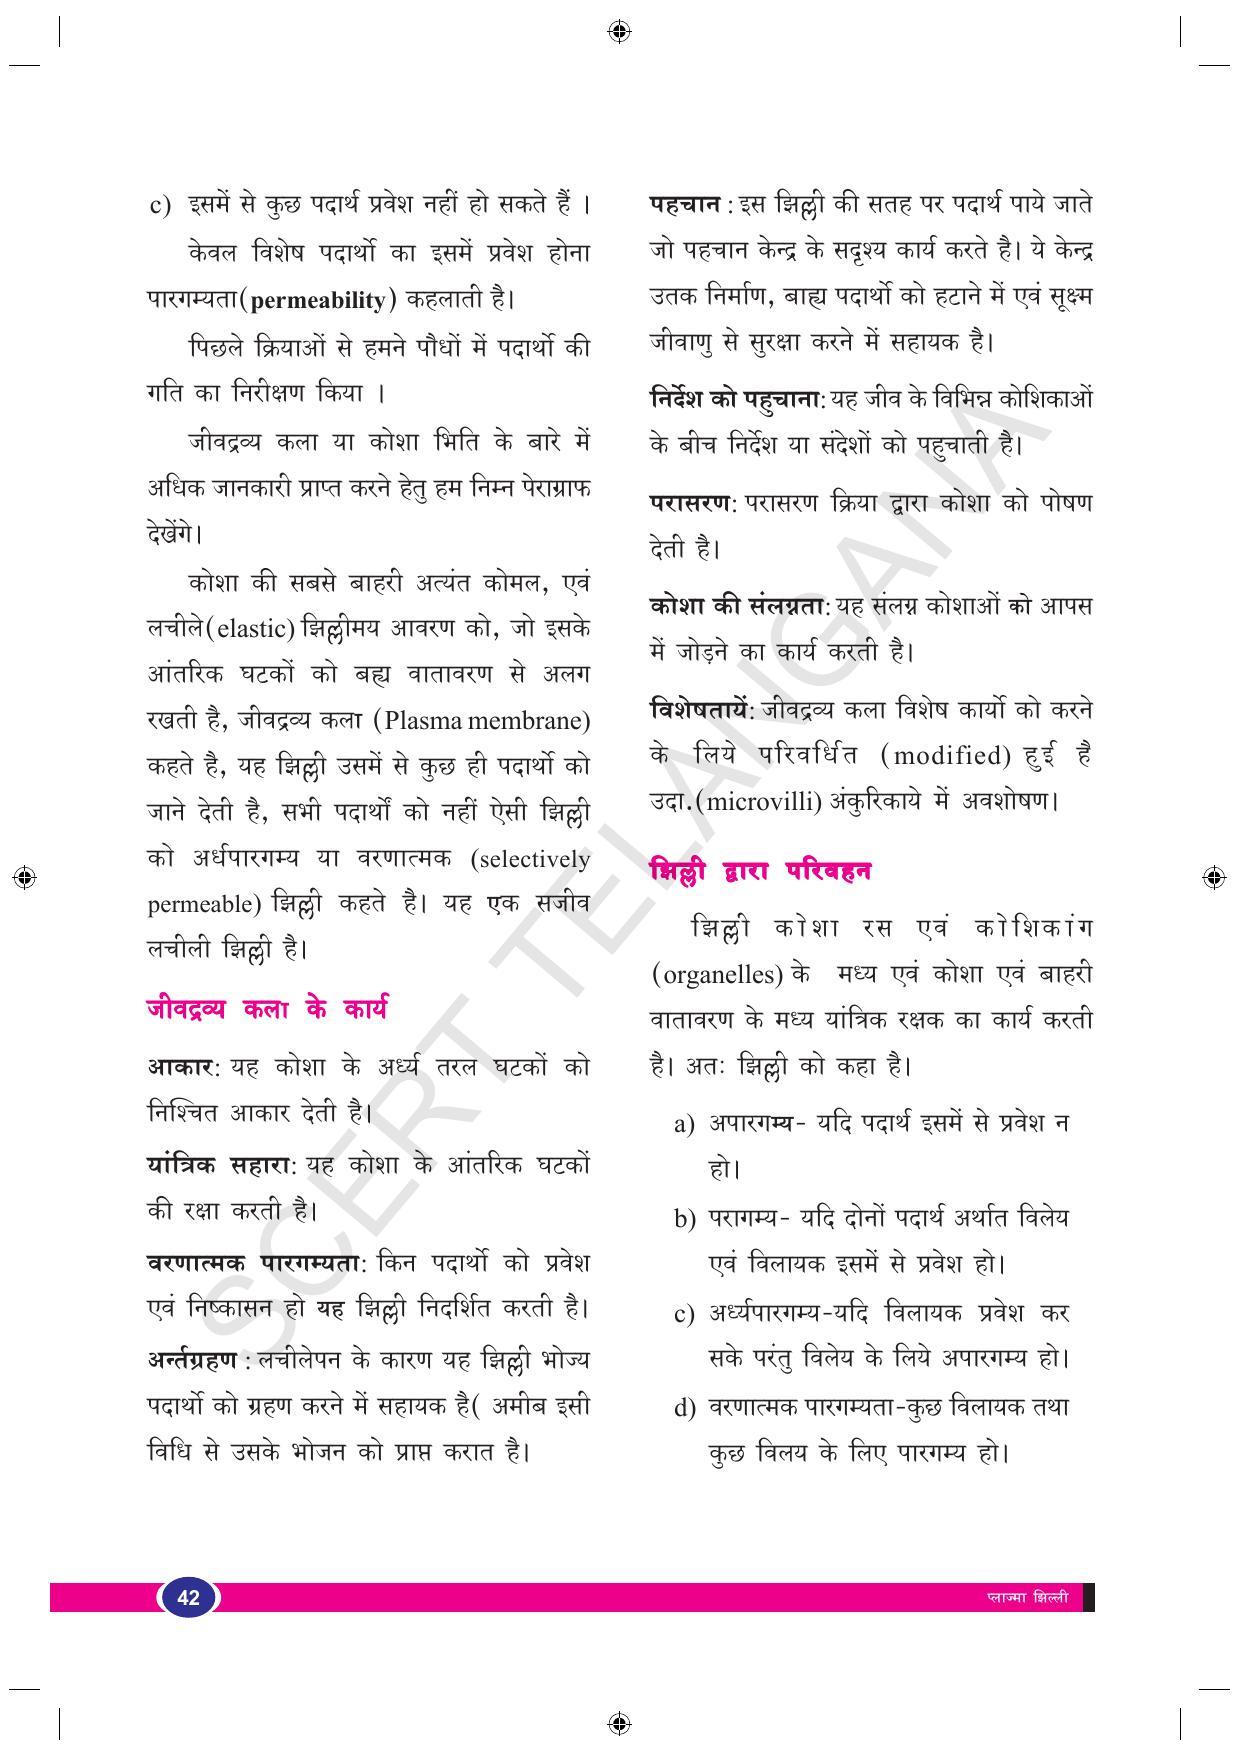 TS SCERT Class 9 Biological Science (Hindi Medium) Text Book - Page 54